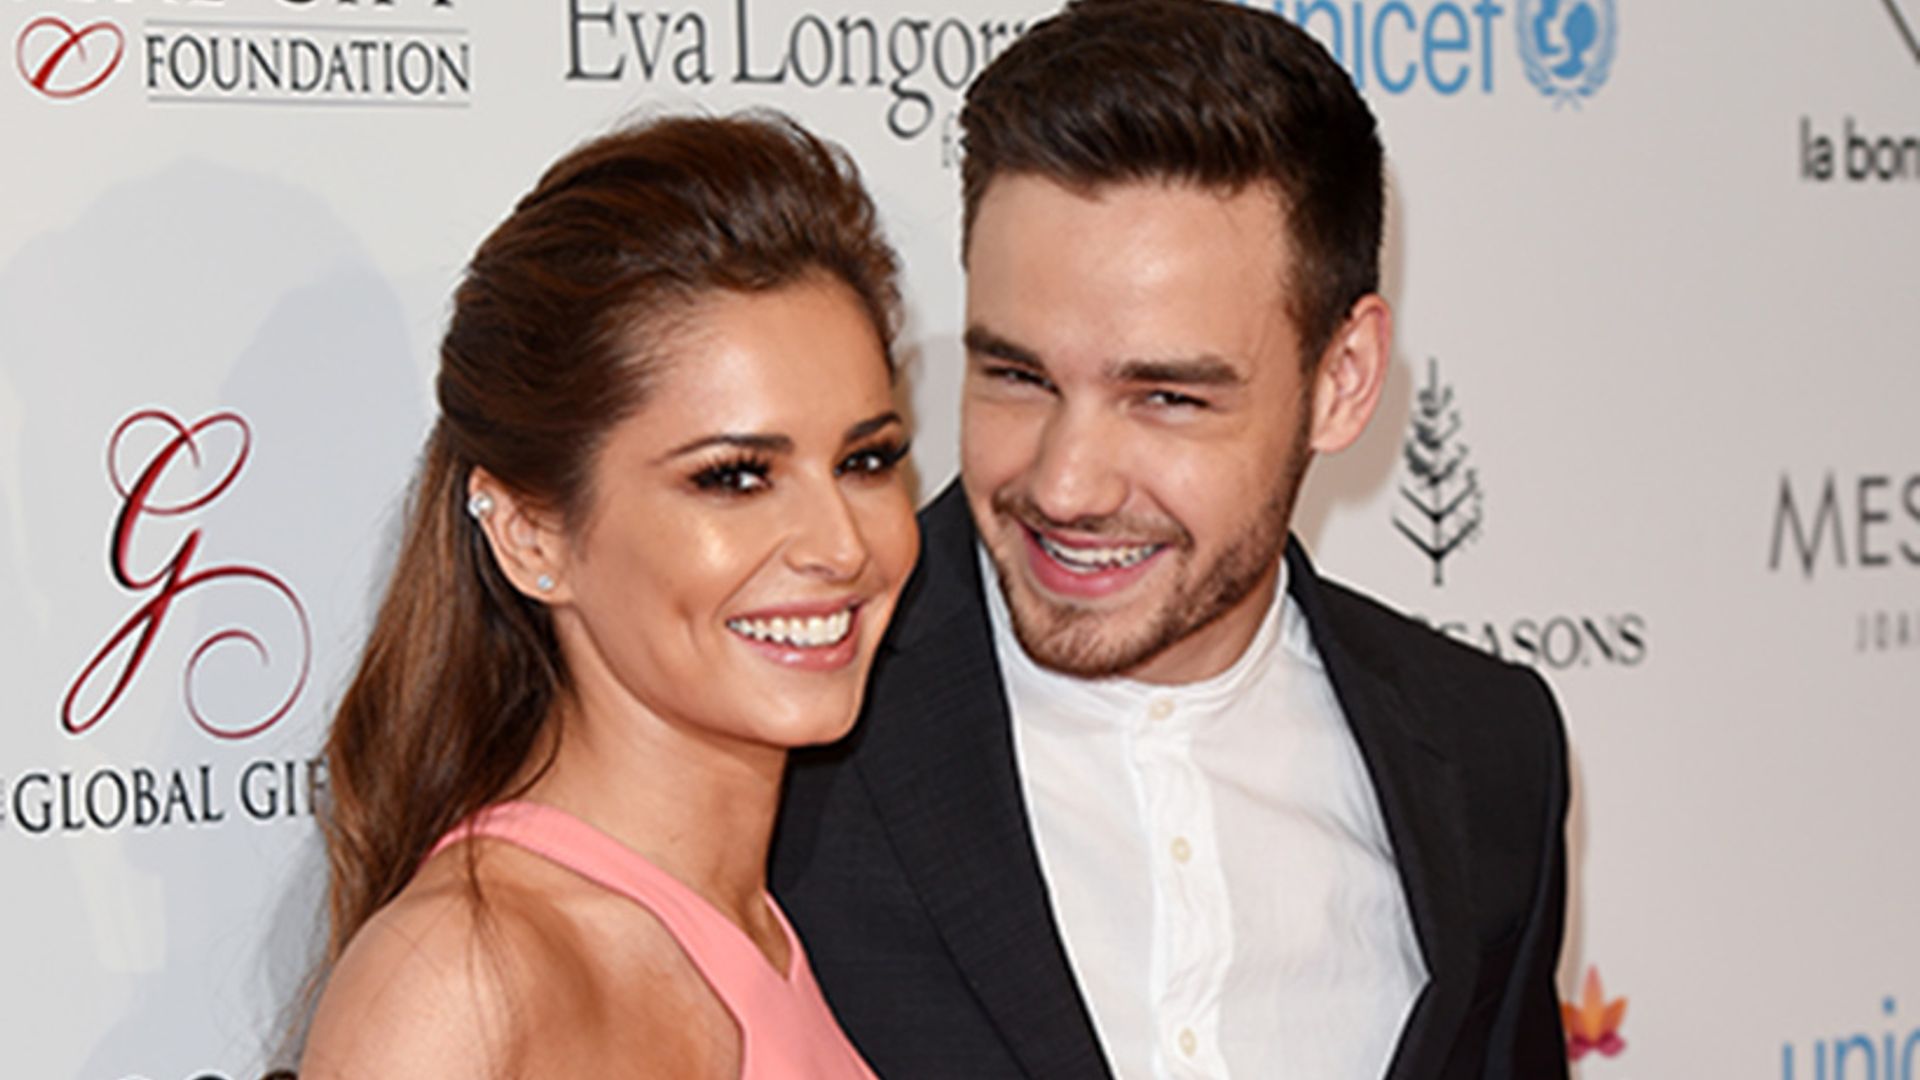 Cheryl posts loving tribute to “Amazing daddy” Liam Payne on his first Father’s Day!